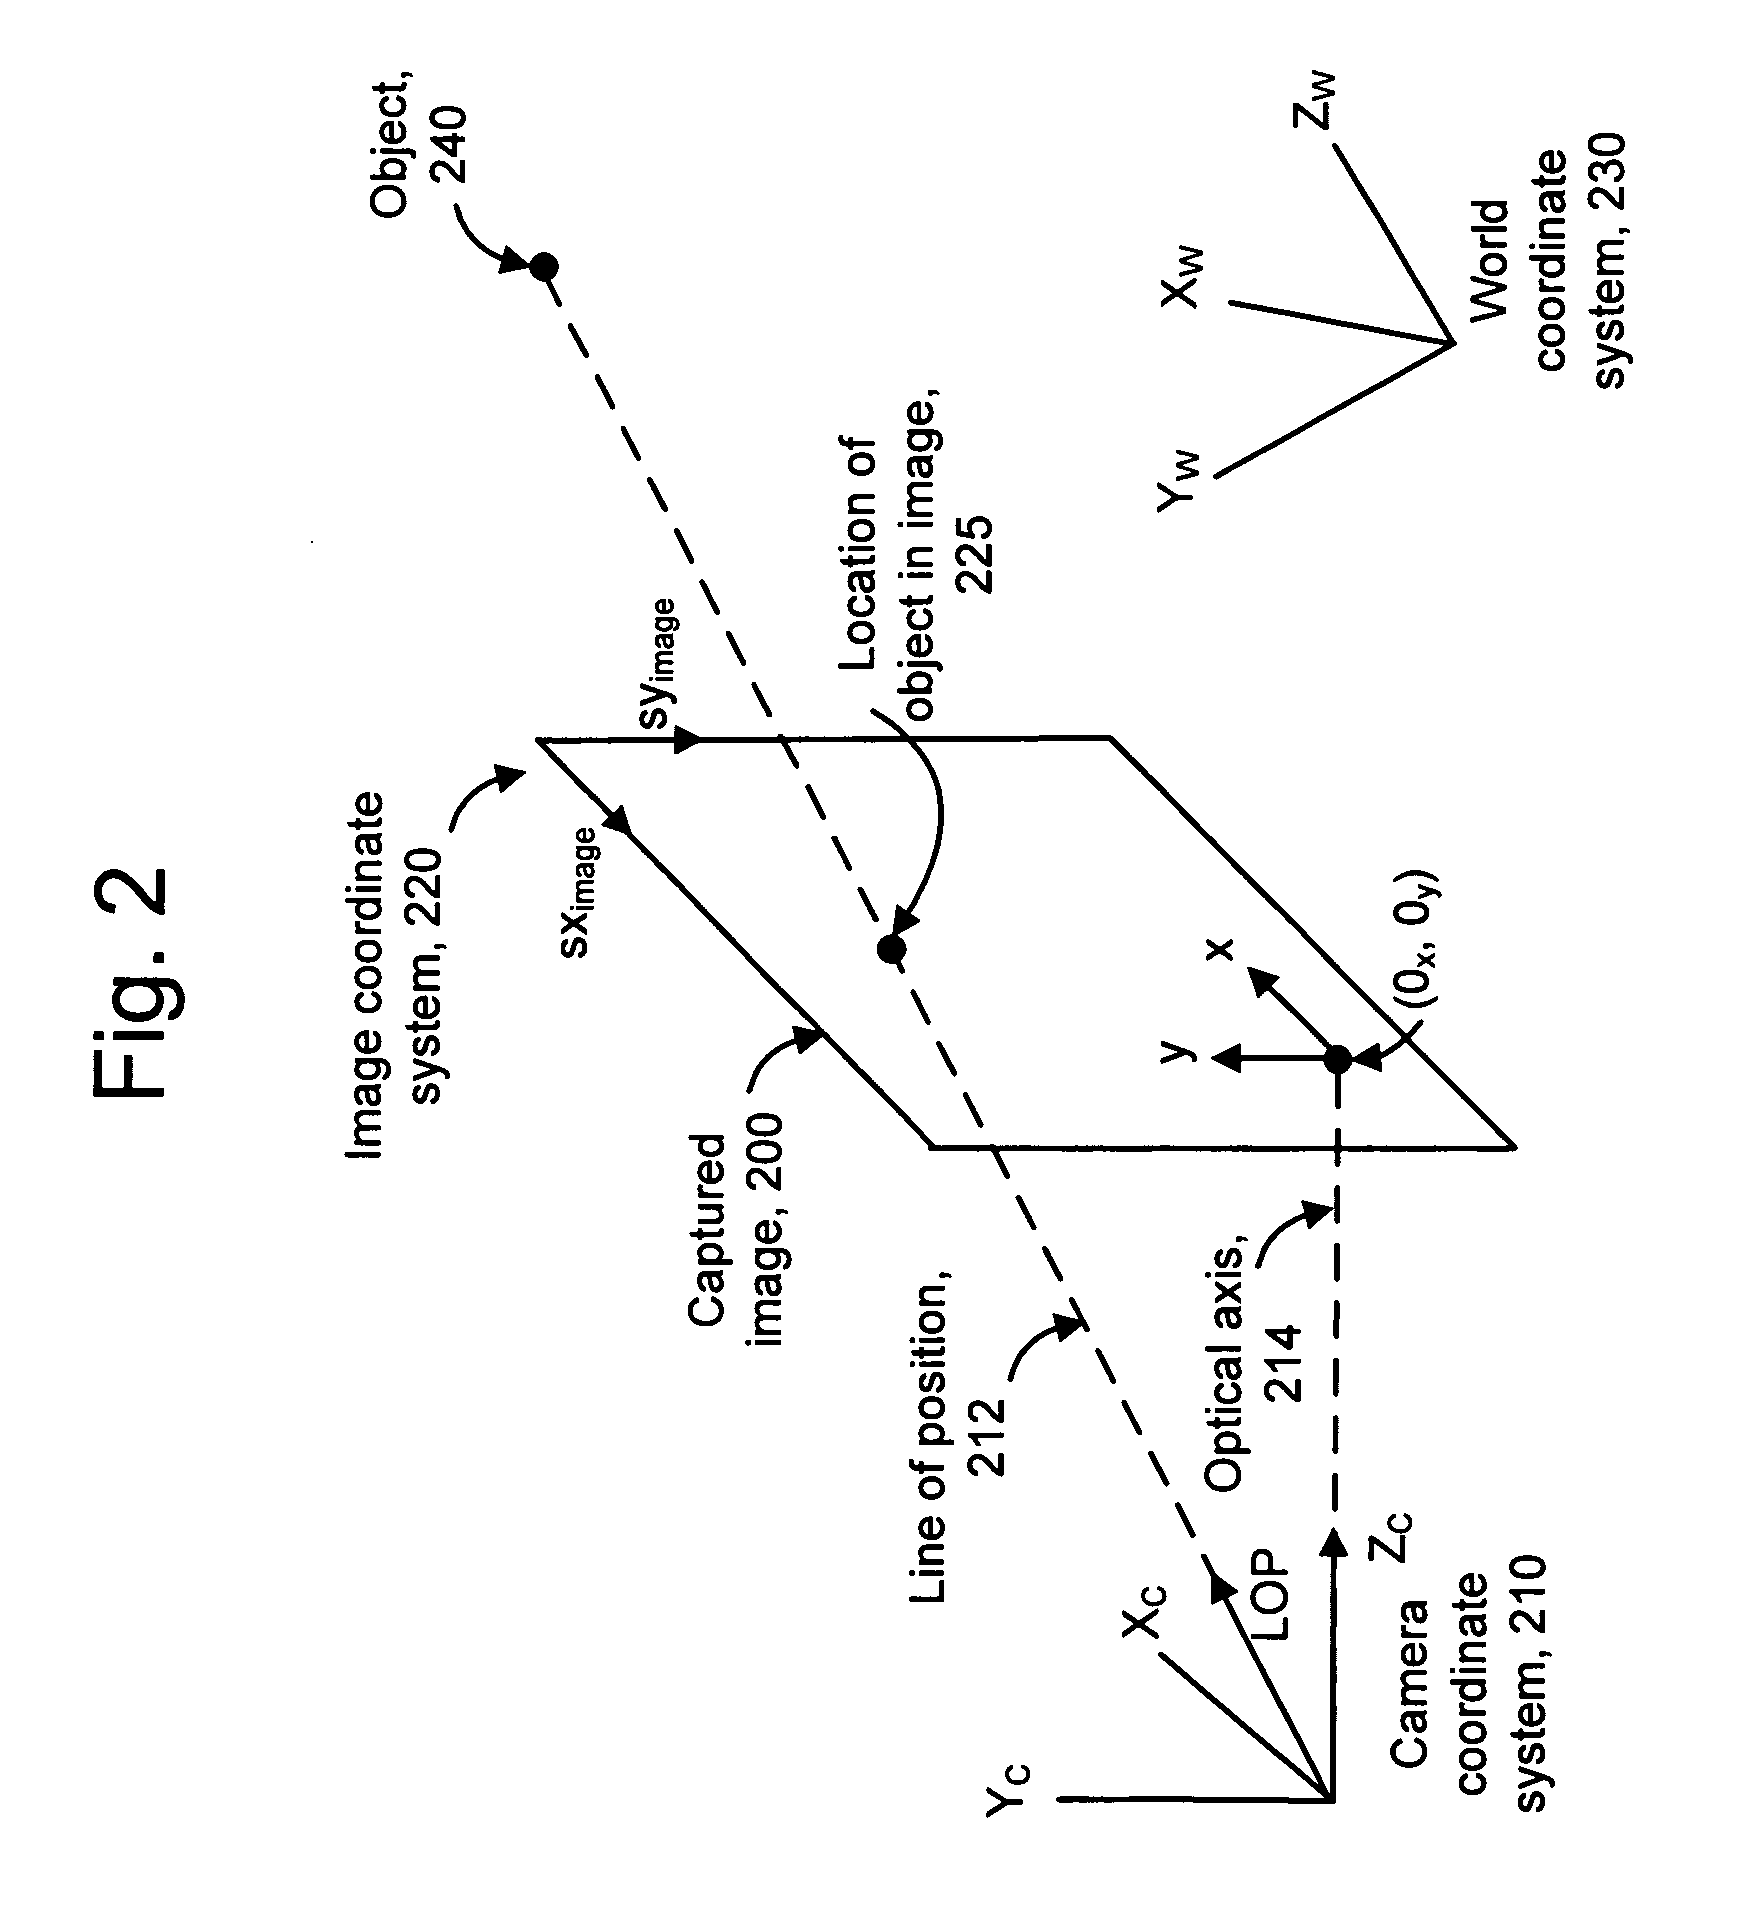 Image repair interface for providing virtual viewpoints